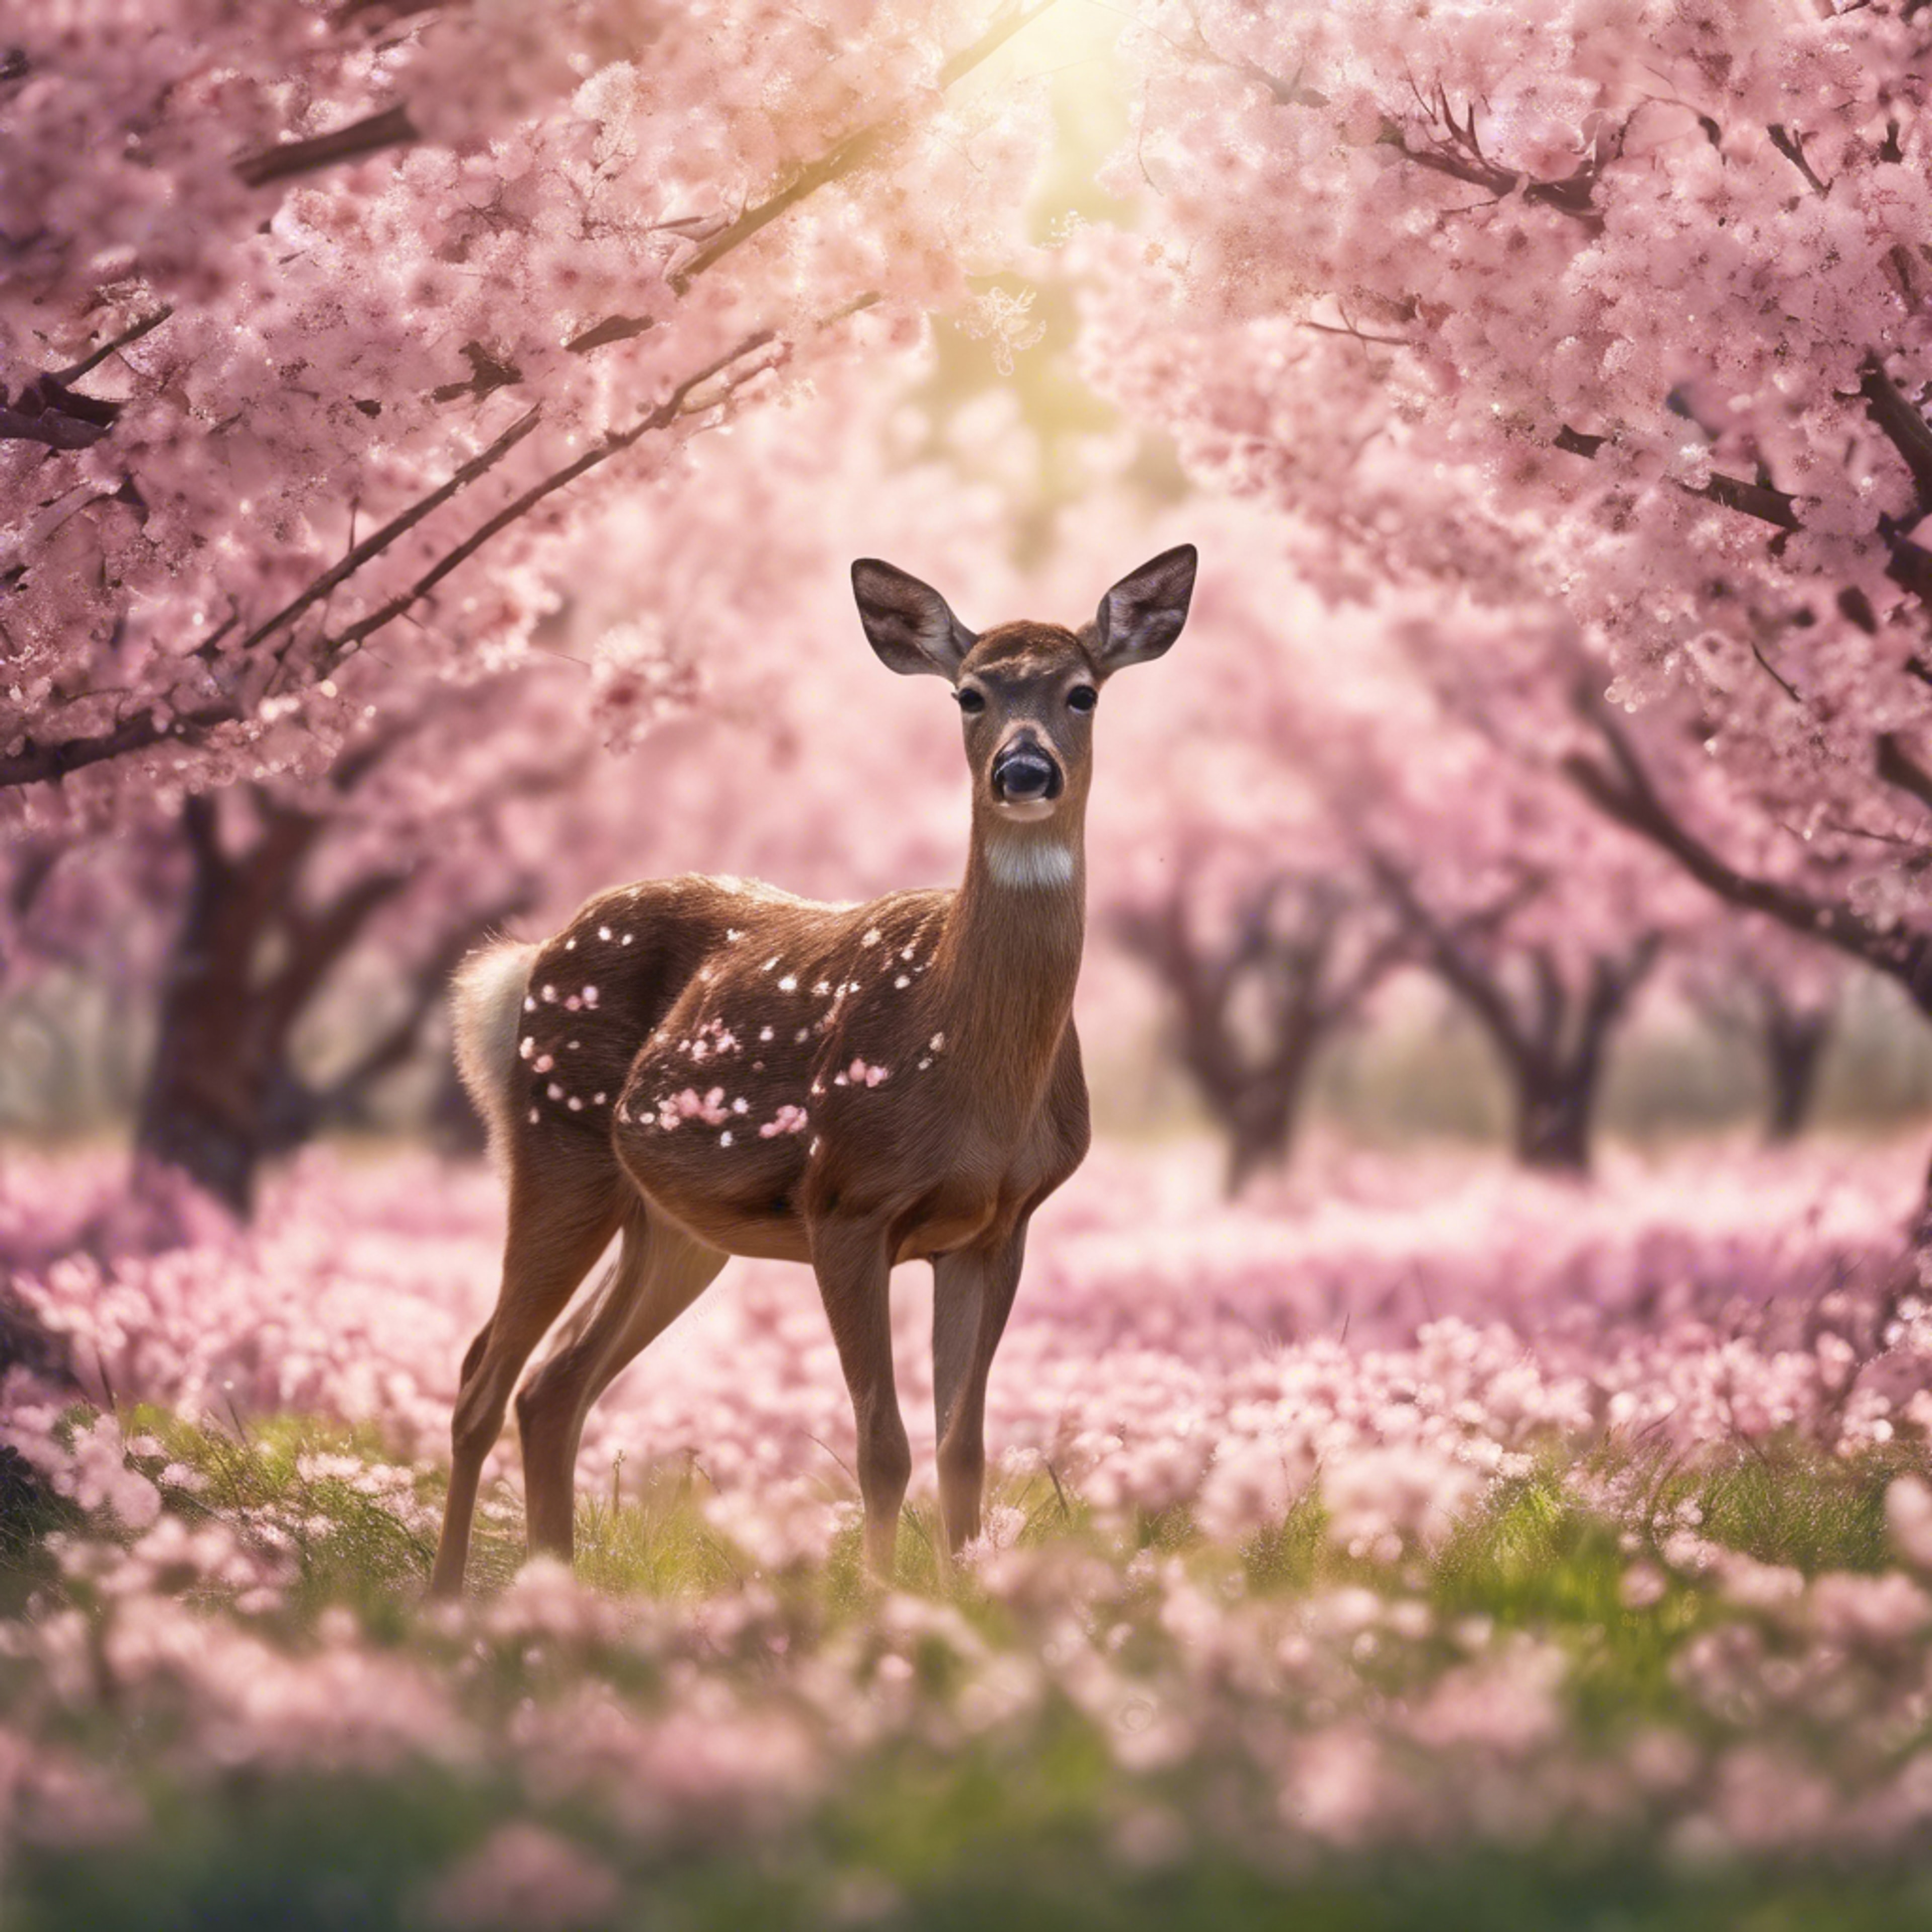 An illustration of a young deer grazing in a field of blooming cherry trees. Tapeta[a2b025554c3c4b6aabc3]